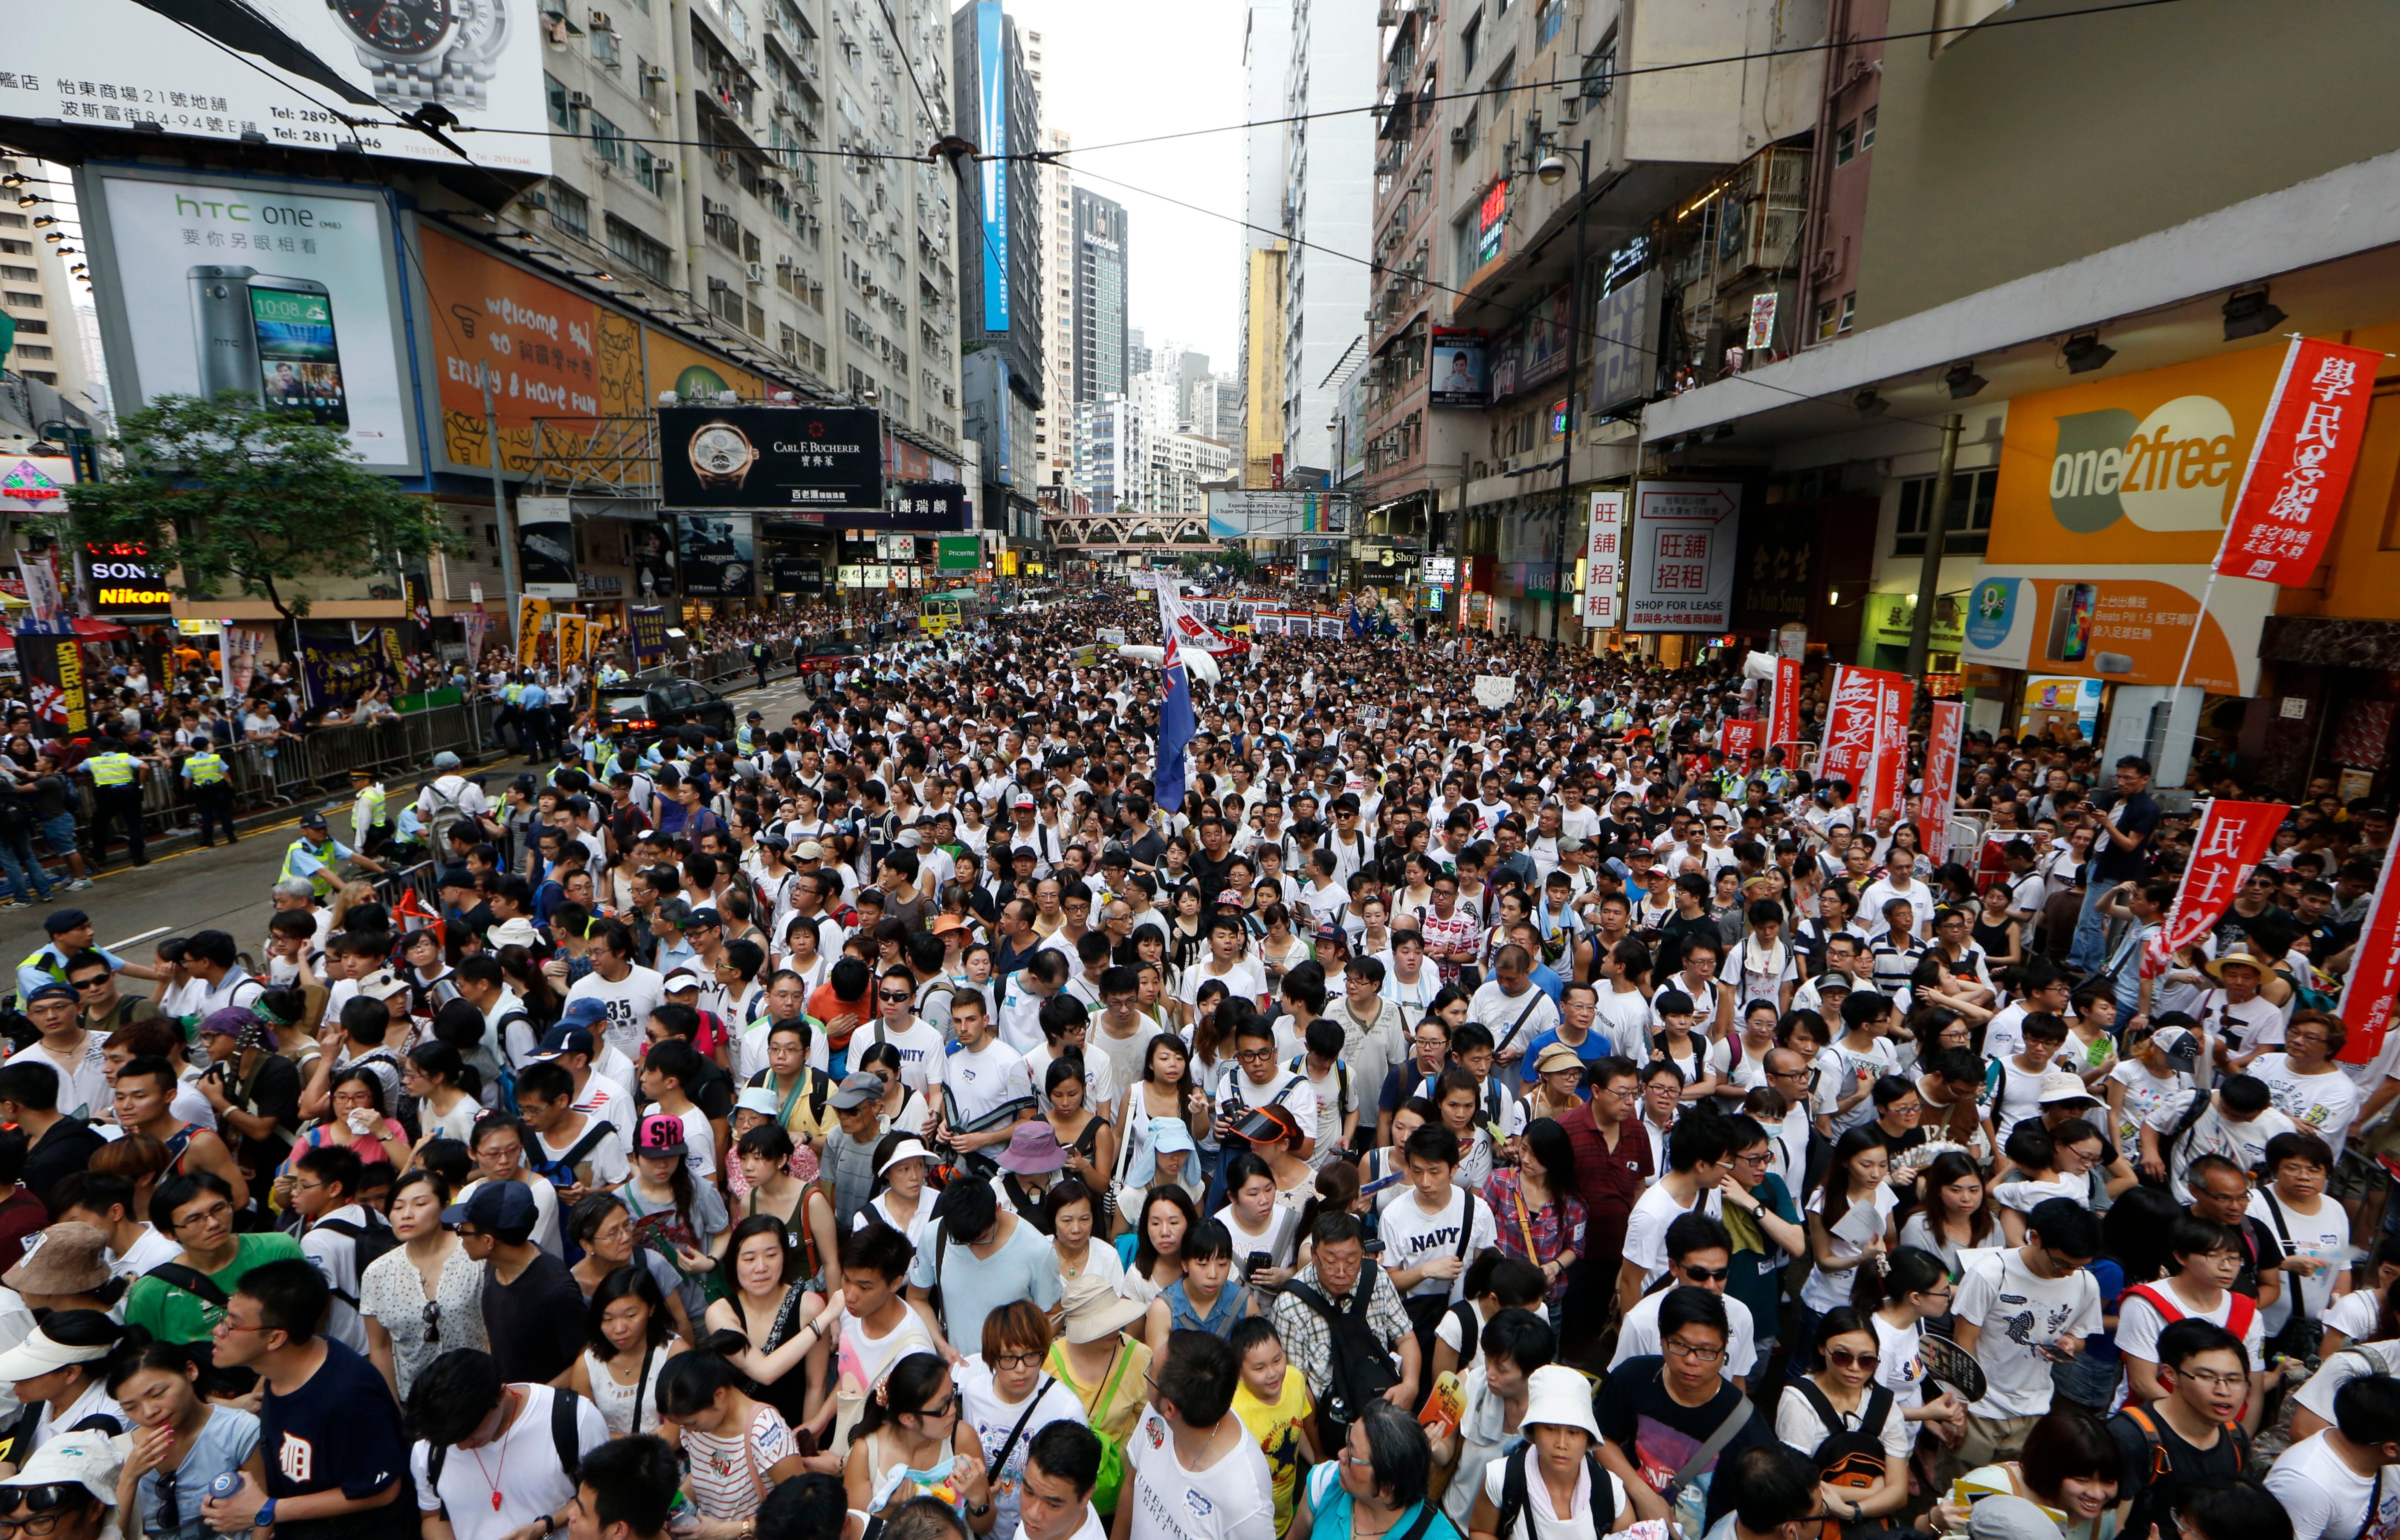 An annual protest march in downtown Hong Kong on July 1, 2014 in demand for democracy. (Kin Cheung/AP)